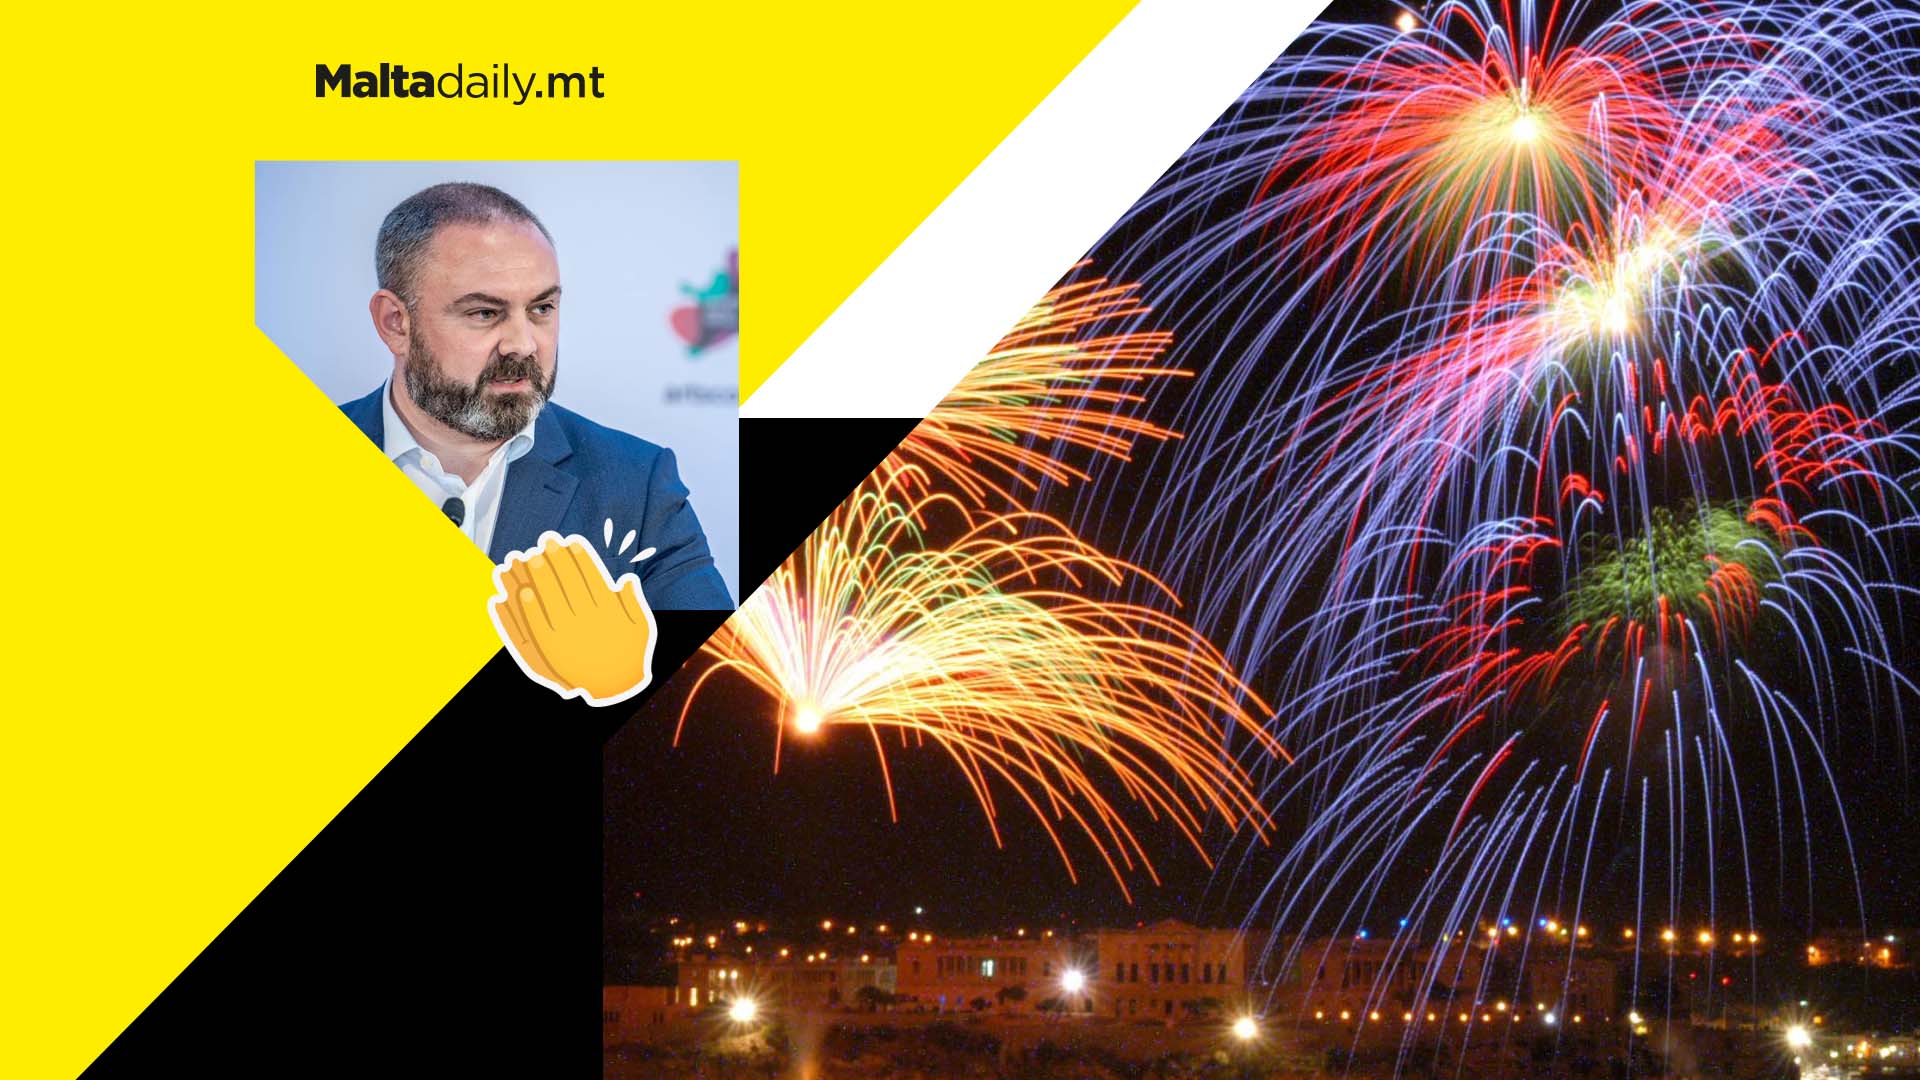 €170,000 investment into Malta’s fireworks factories by Arts Minister